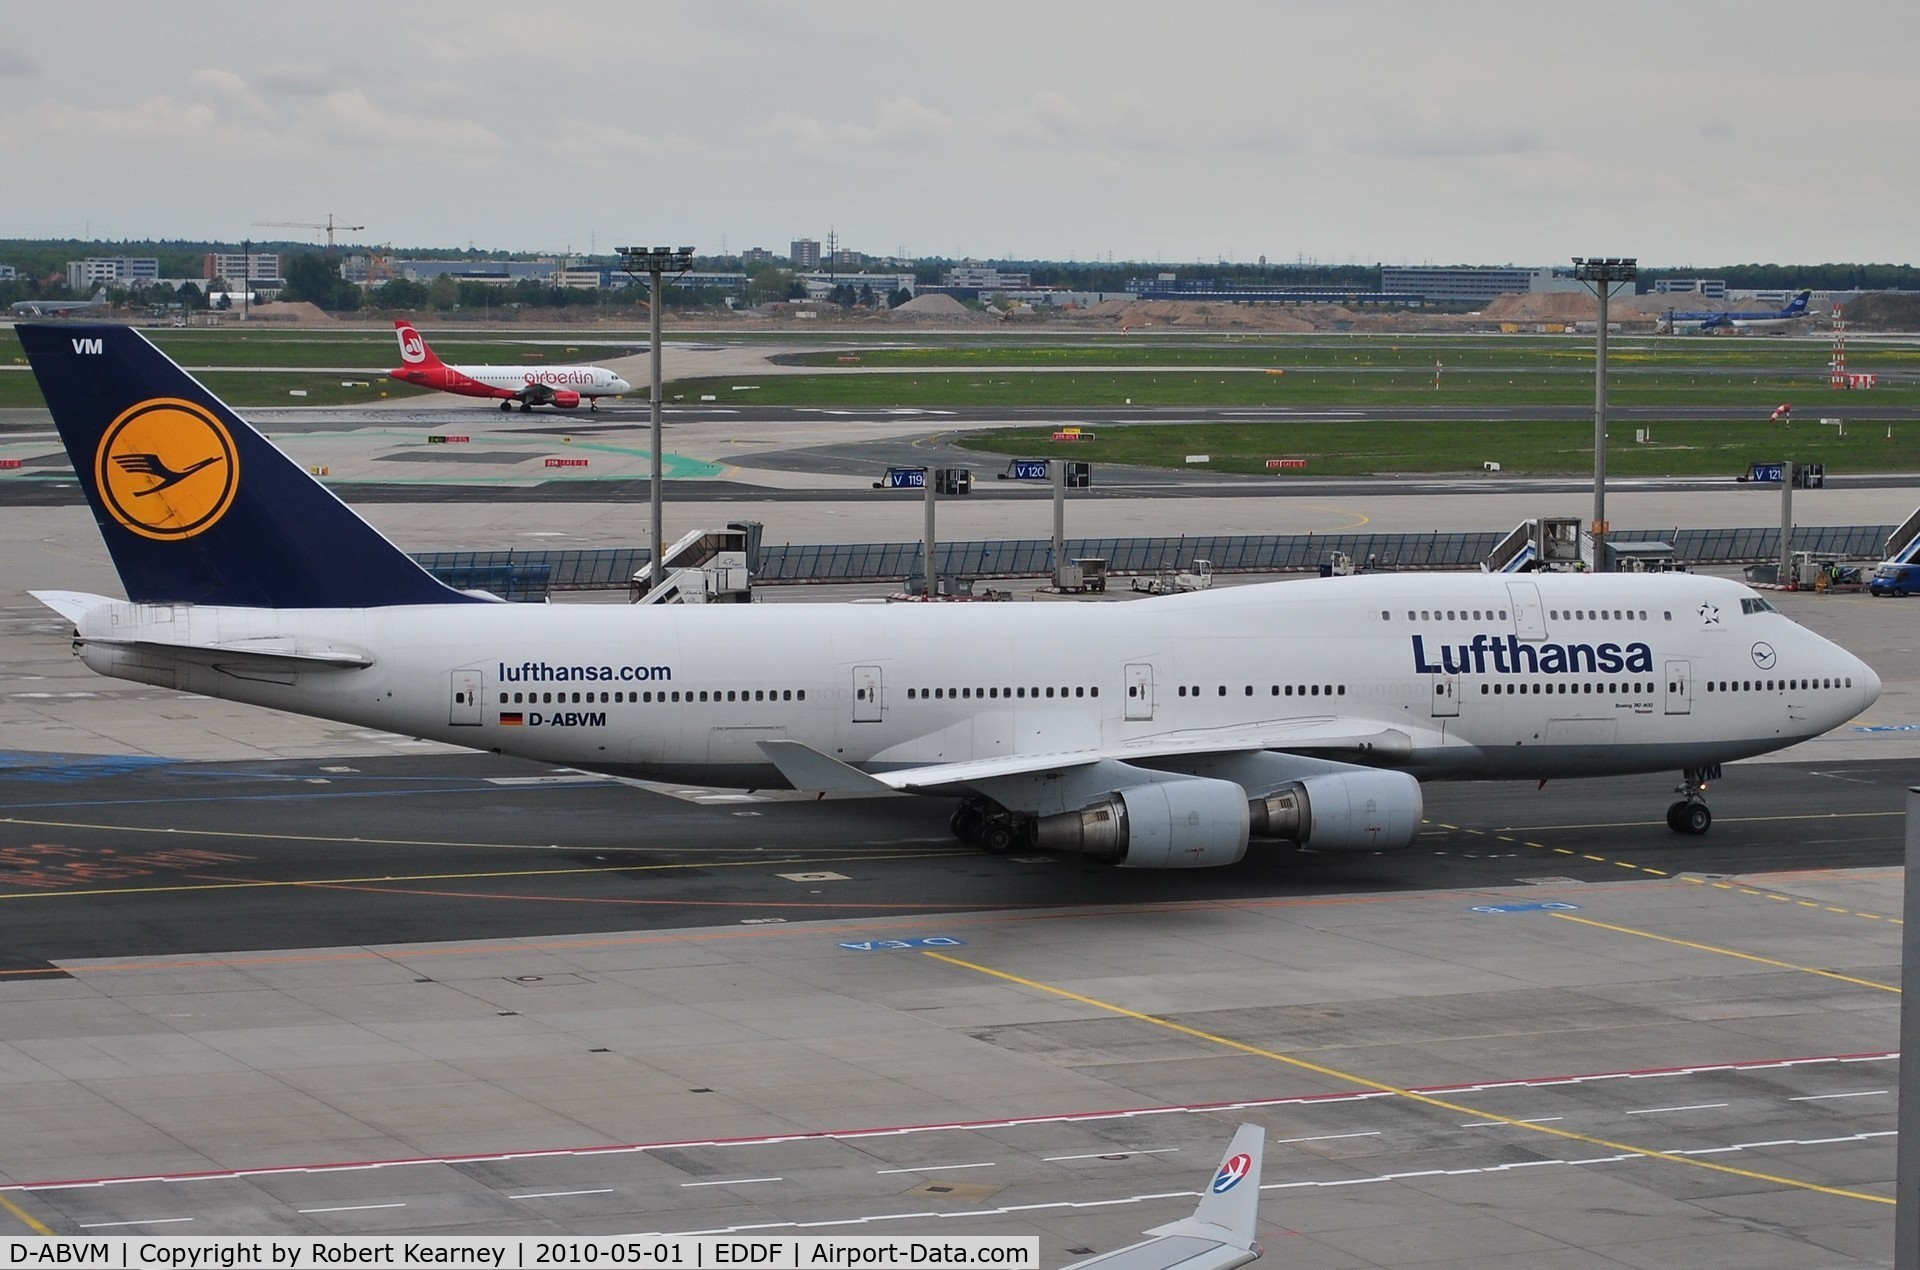 D-ABVM, 1998 Boeing 747-430 C/N 29101, Lufthansa heading to stand